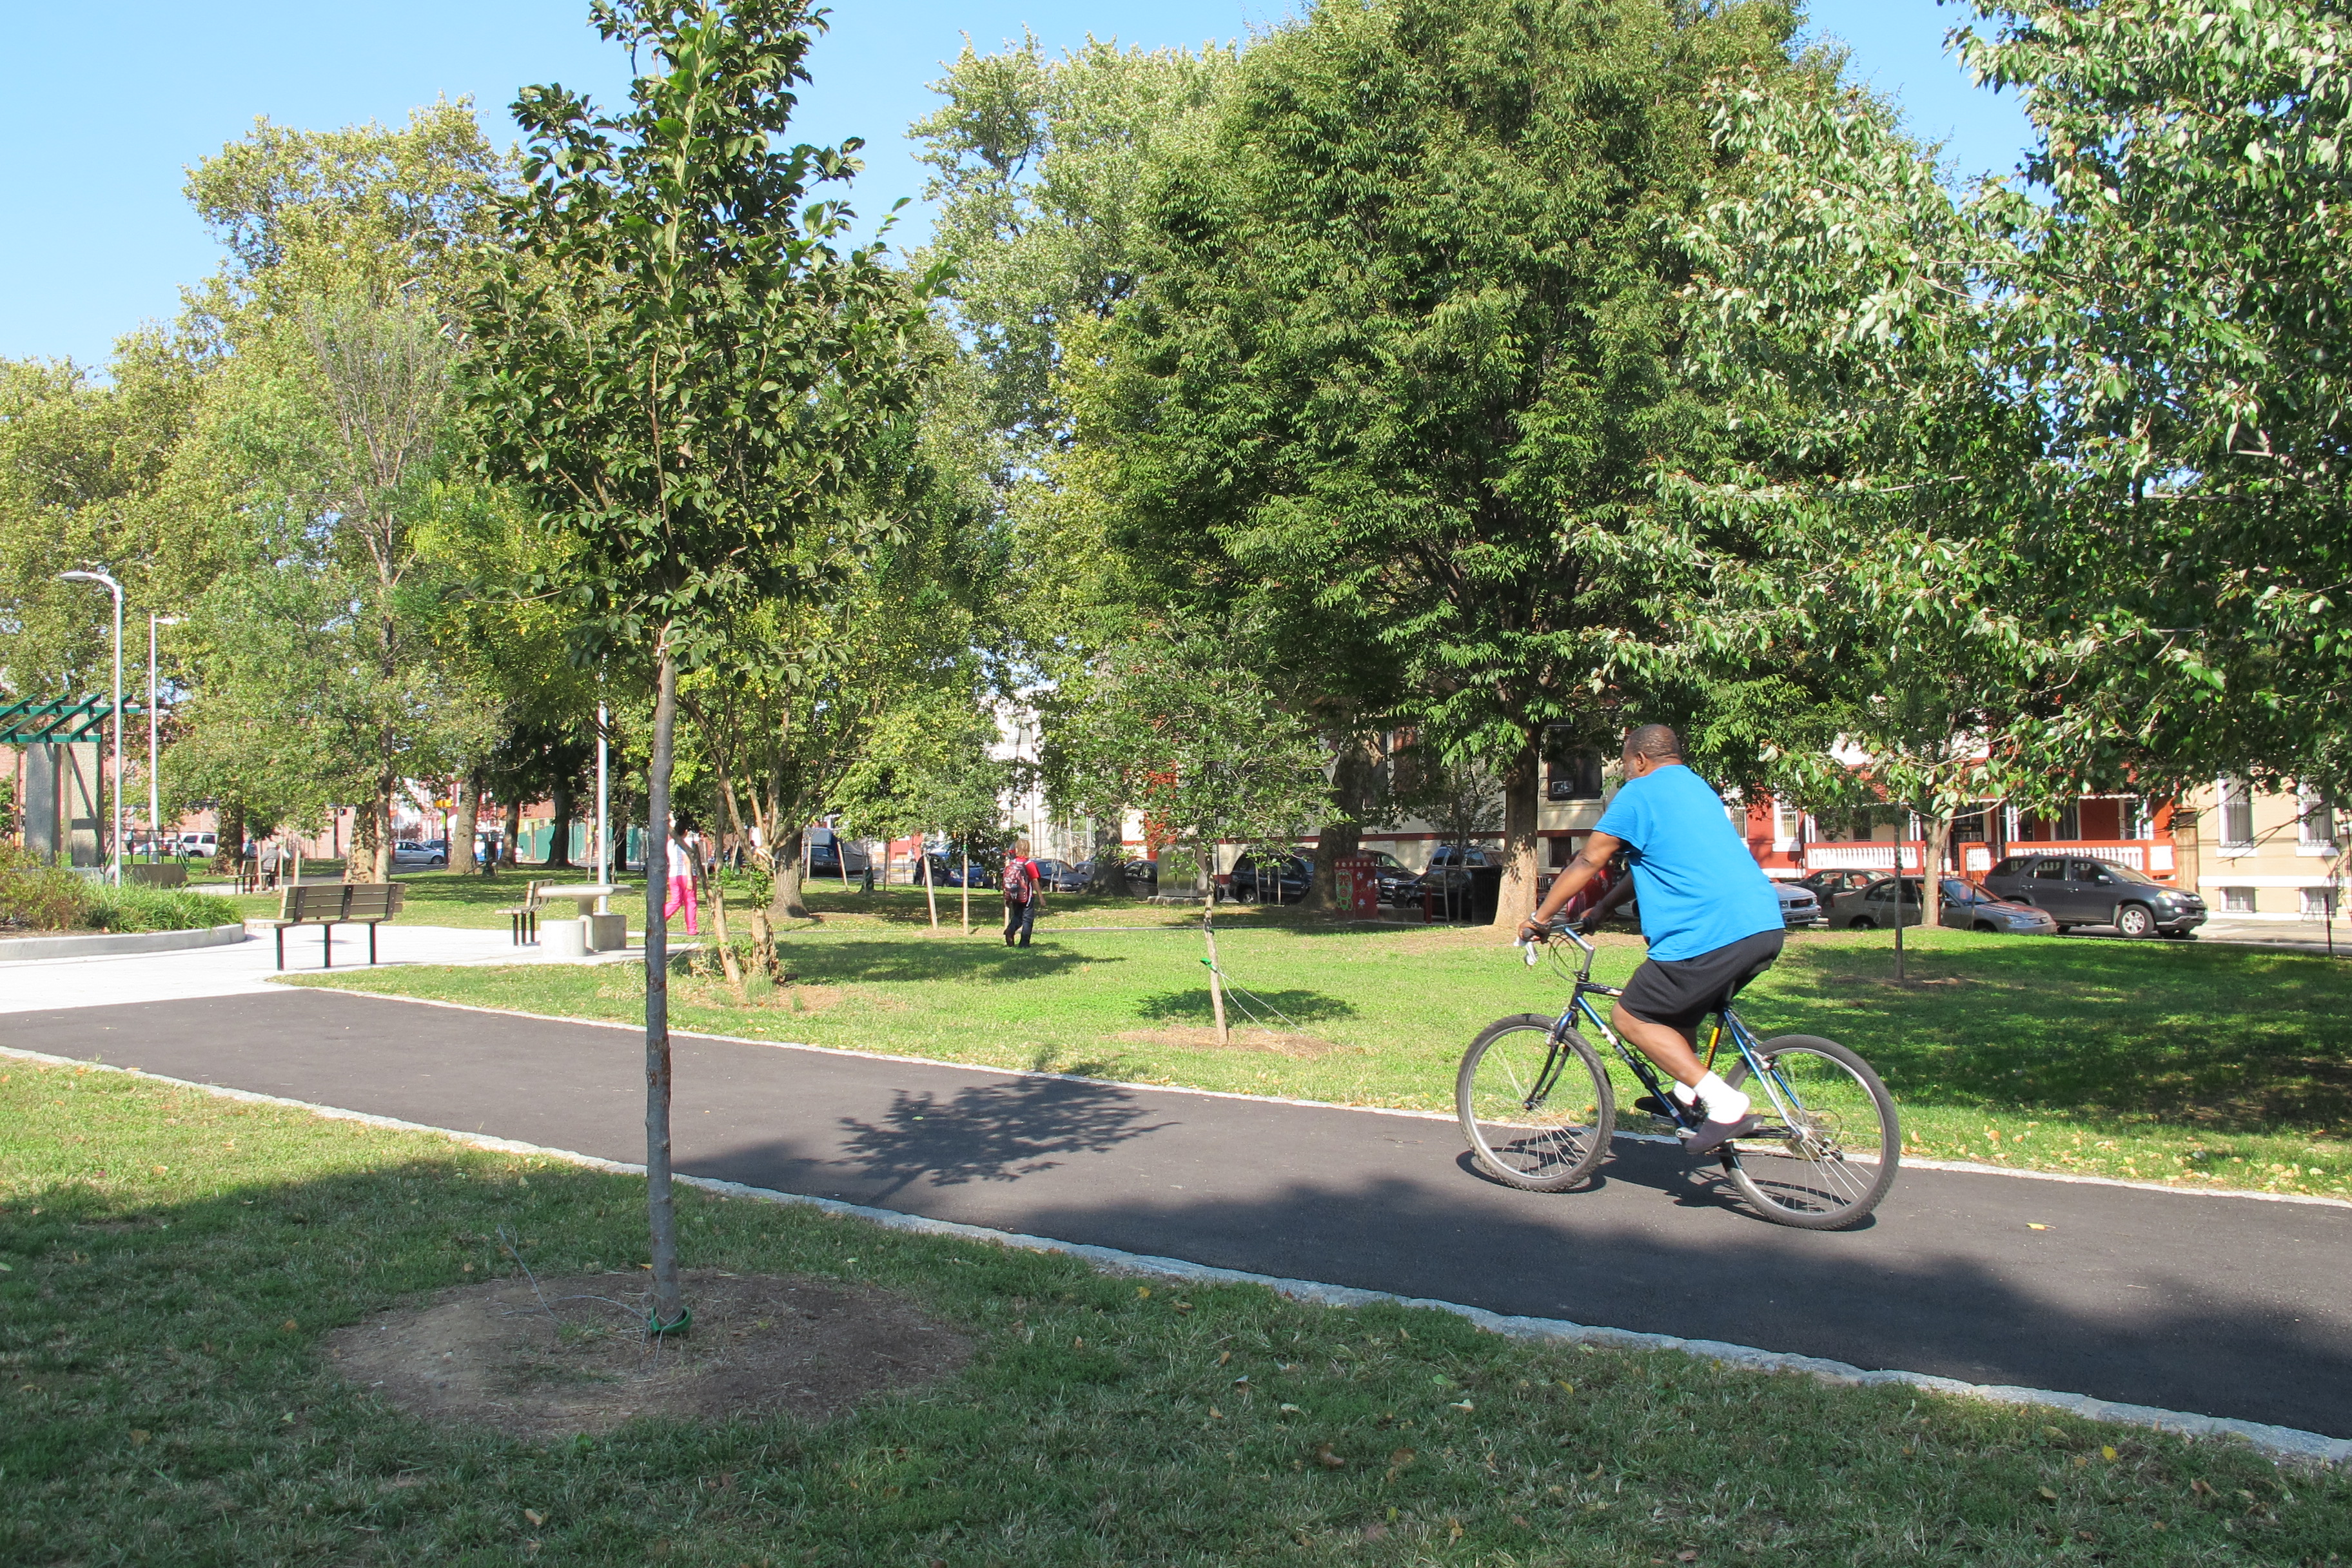 New trees and walkways are among the recent improvements to Fairhill Square